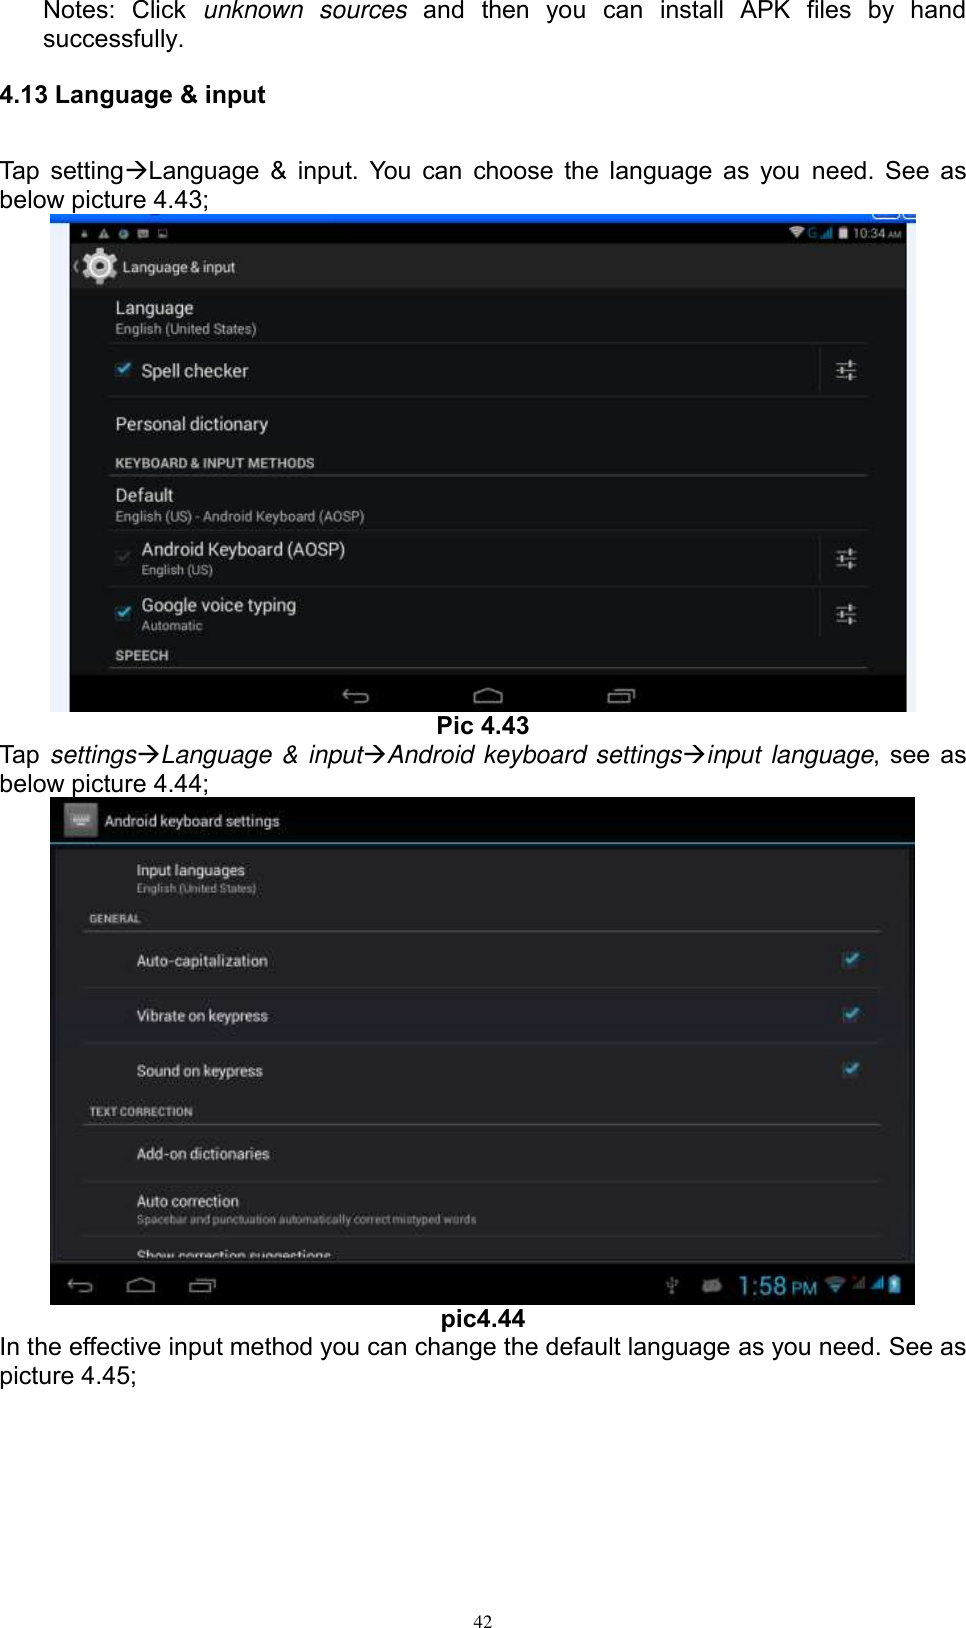      42 Notes:  Click  unknown  sources  and  then  you  can  install  APK  files  by  hand successfully.   4.13 Language &amp; input Tap settingLanguage &amp; input. You can choose the language as you  need. See as below picture 4.43;  Pic 4.43 Tap settingsLanguage &amp; inputAndroid keyboard settingsinput language, see as below picture 4.44;  pic4.44 In the effective input method you can change the default language as you need. See as picture 4.45; 